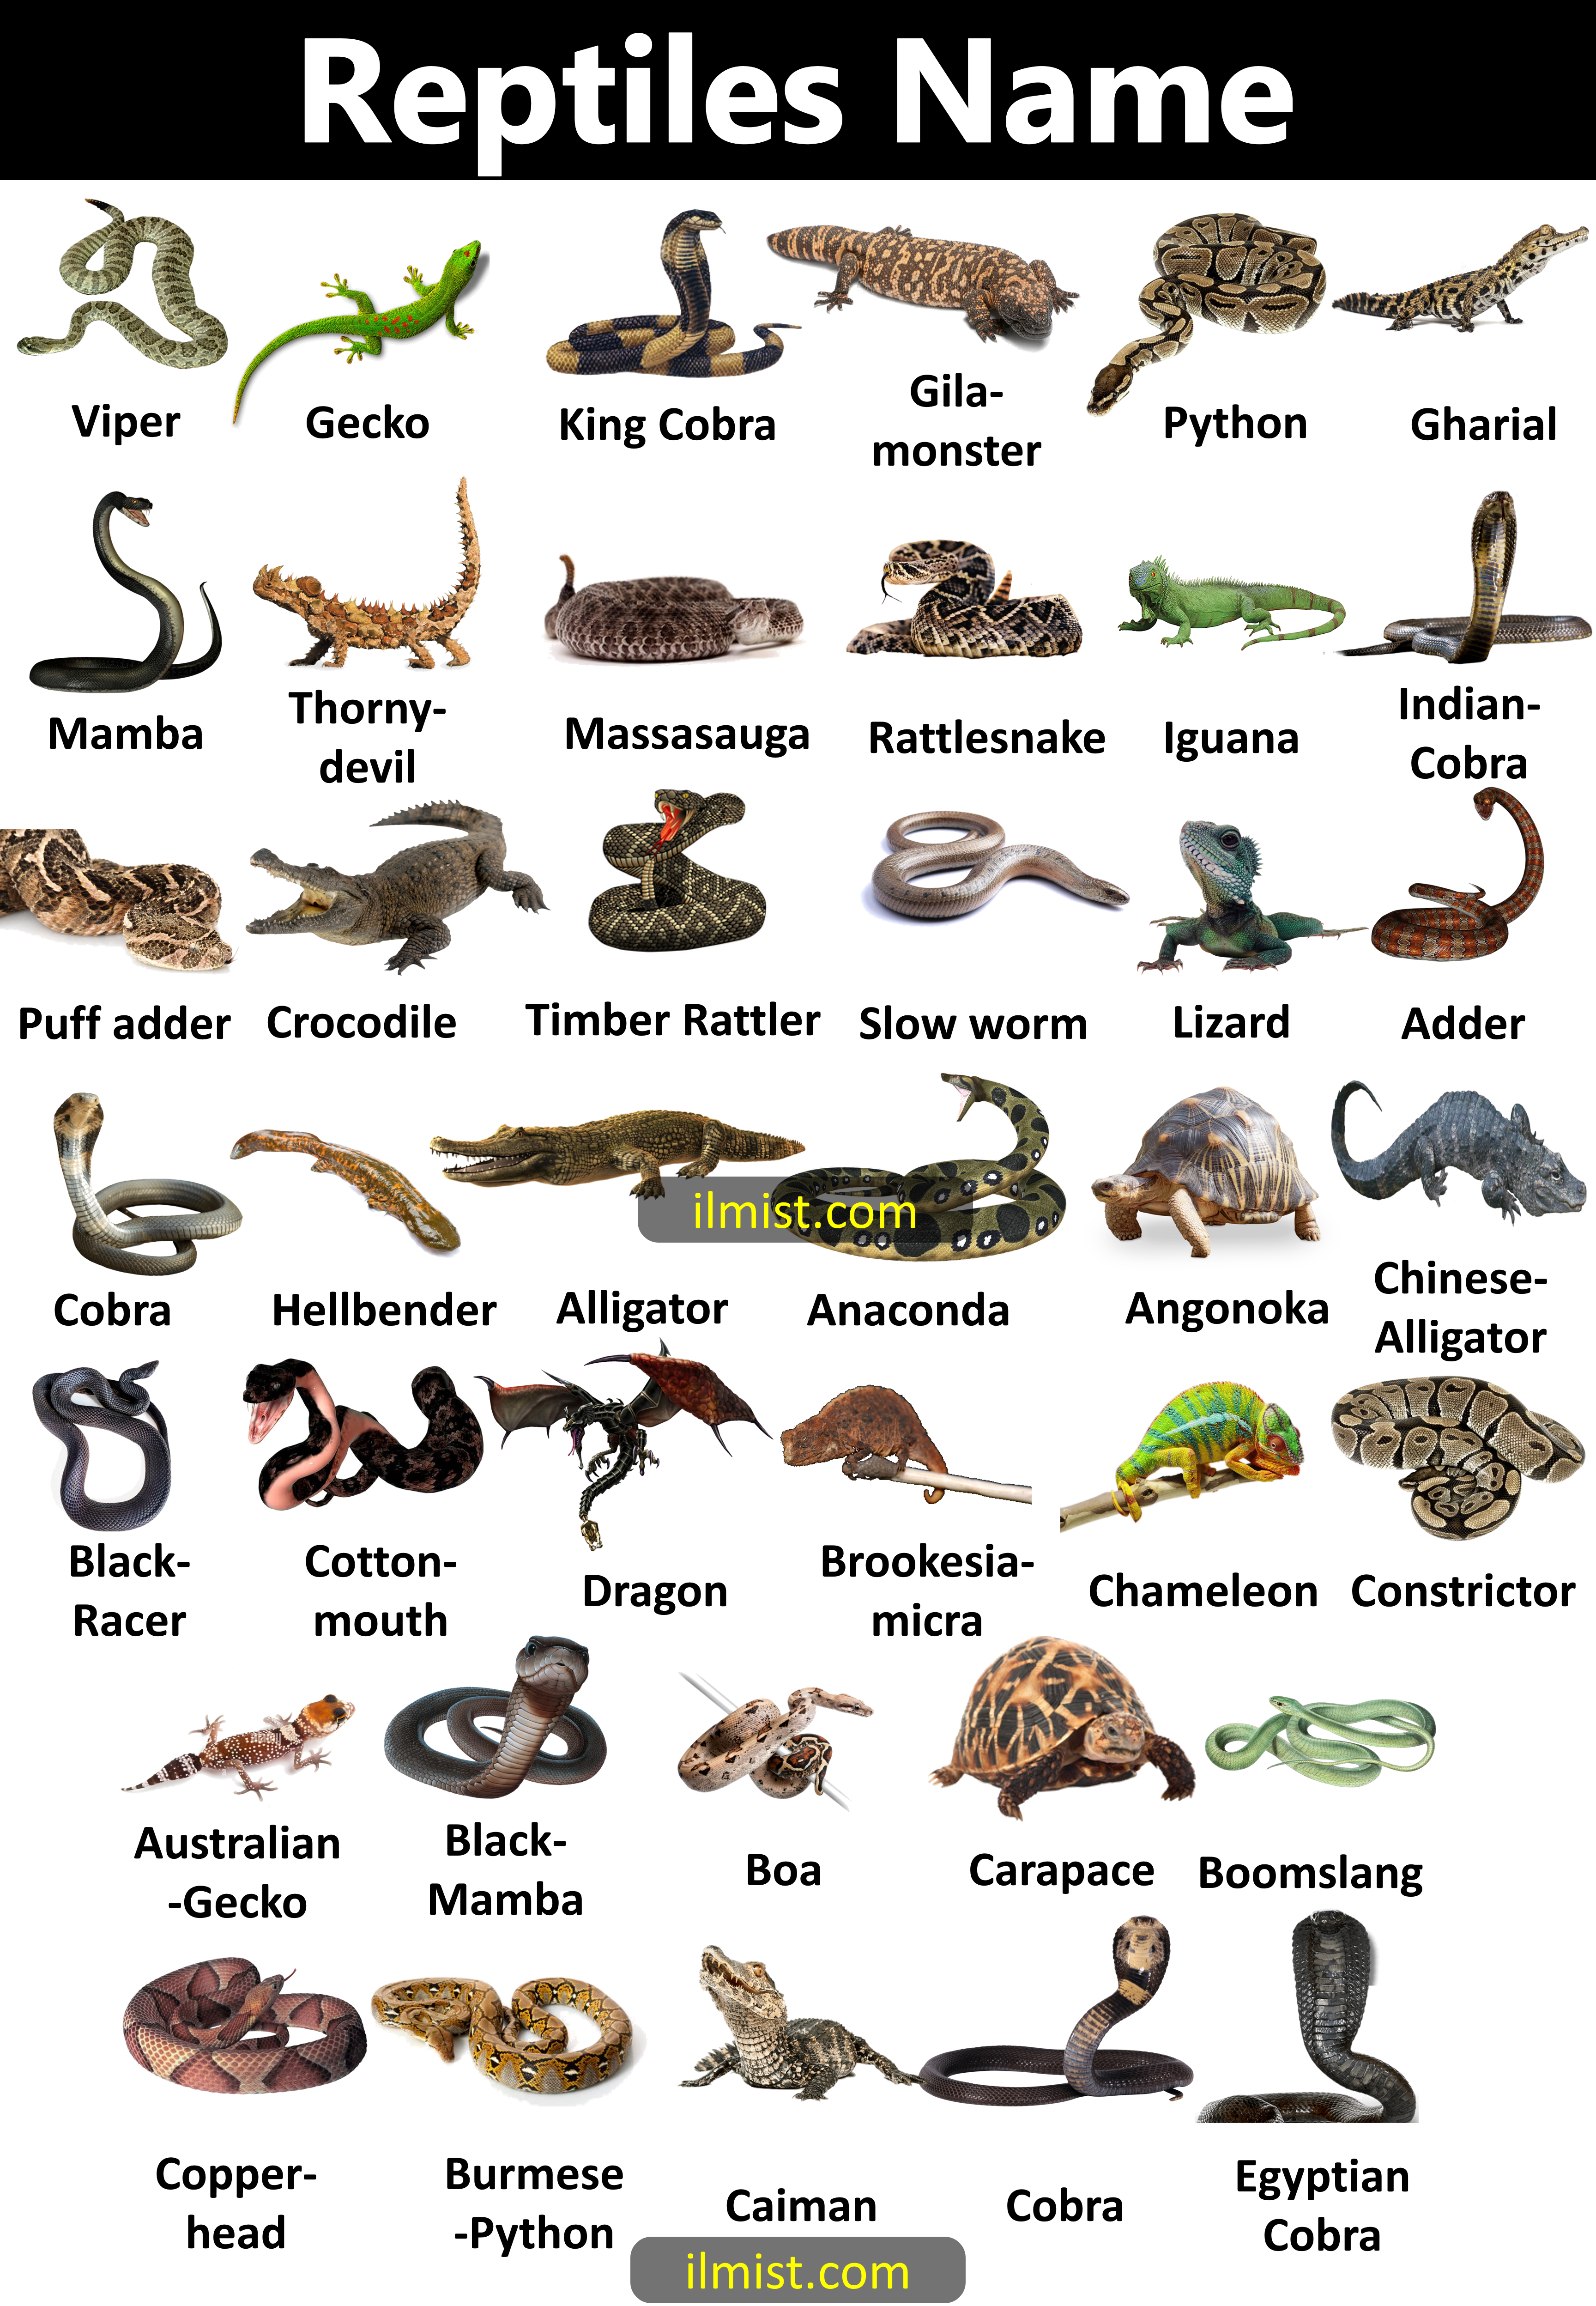 Reptiles Animals Name with Pictures and Details